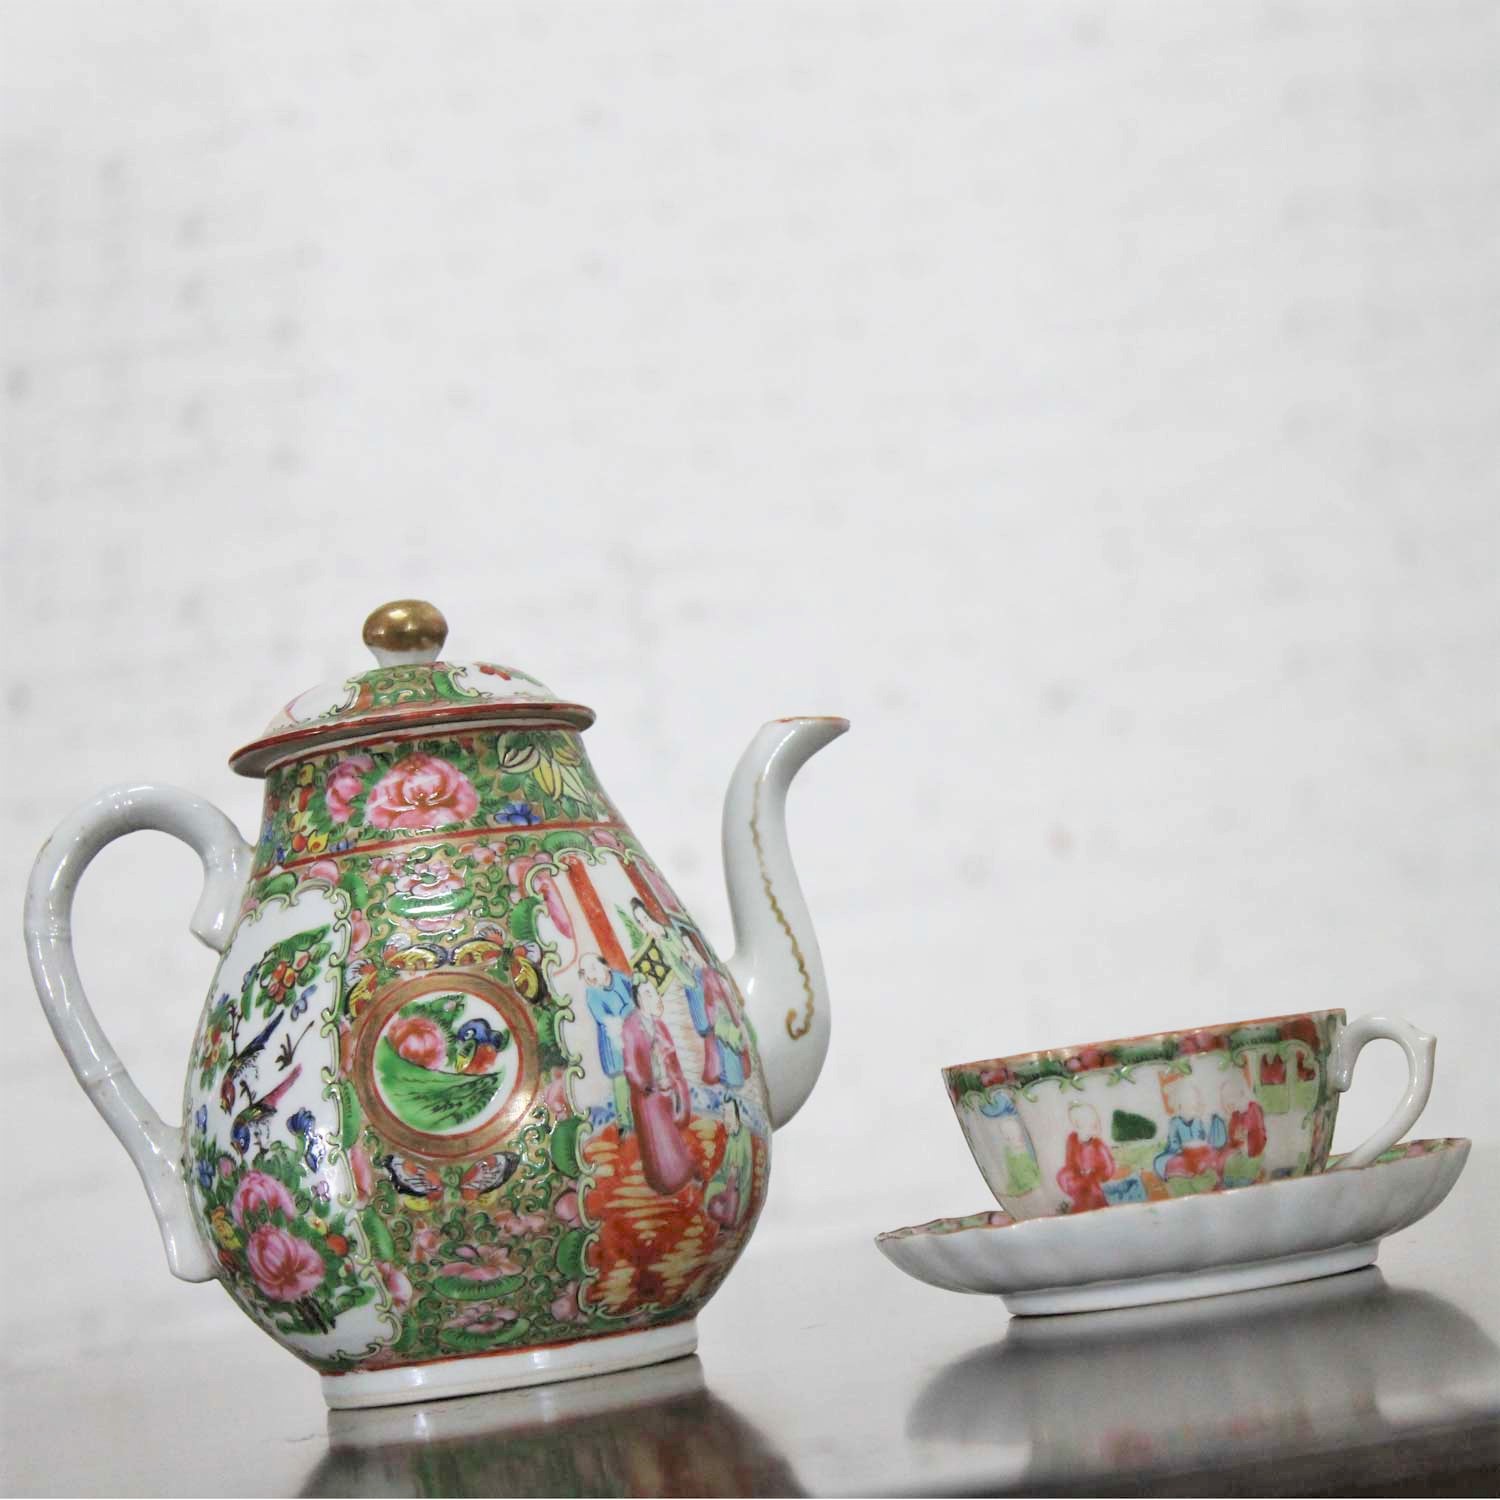 Antique Chinese Qing Rose Medallion Porcelain Teapot with Single Teacup and Saucer